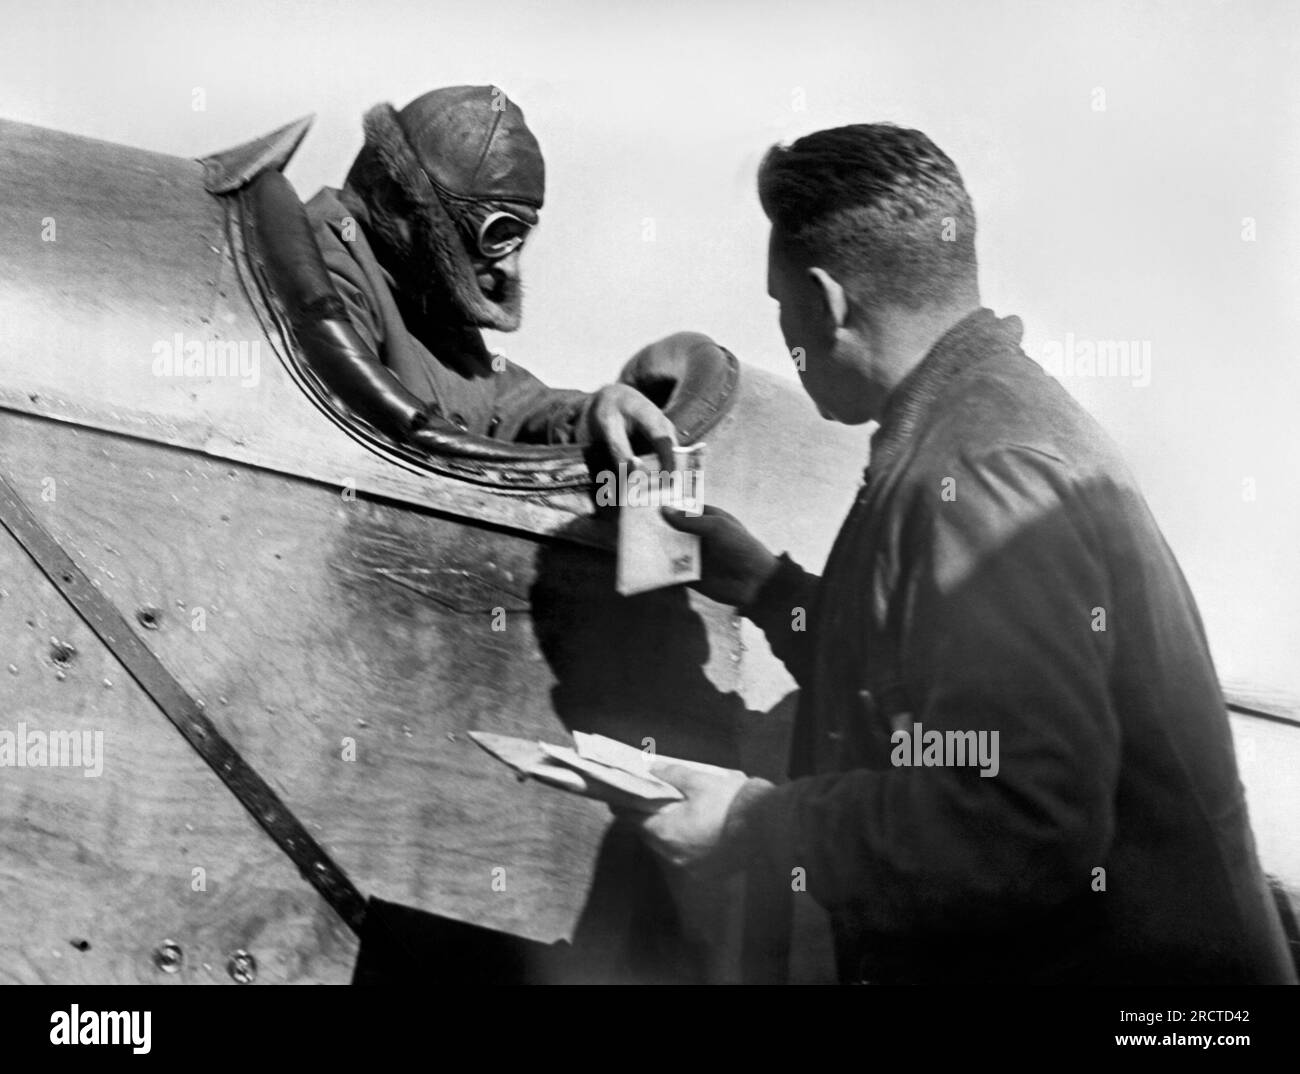 Garden City, New York:  August 22, 1923 U.S. Air Mail pilot C. Eugene Johnson arrives at Curtiss Field on Long Island on the final leg of the coast to coast air mail service between San Francisco and New York. He is handing over the first letters to arrive. Stock Photo